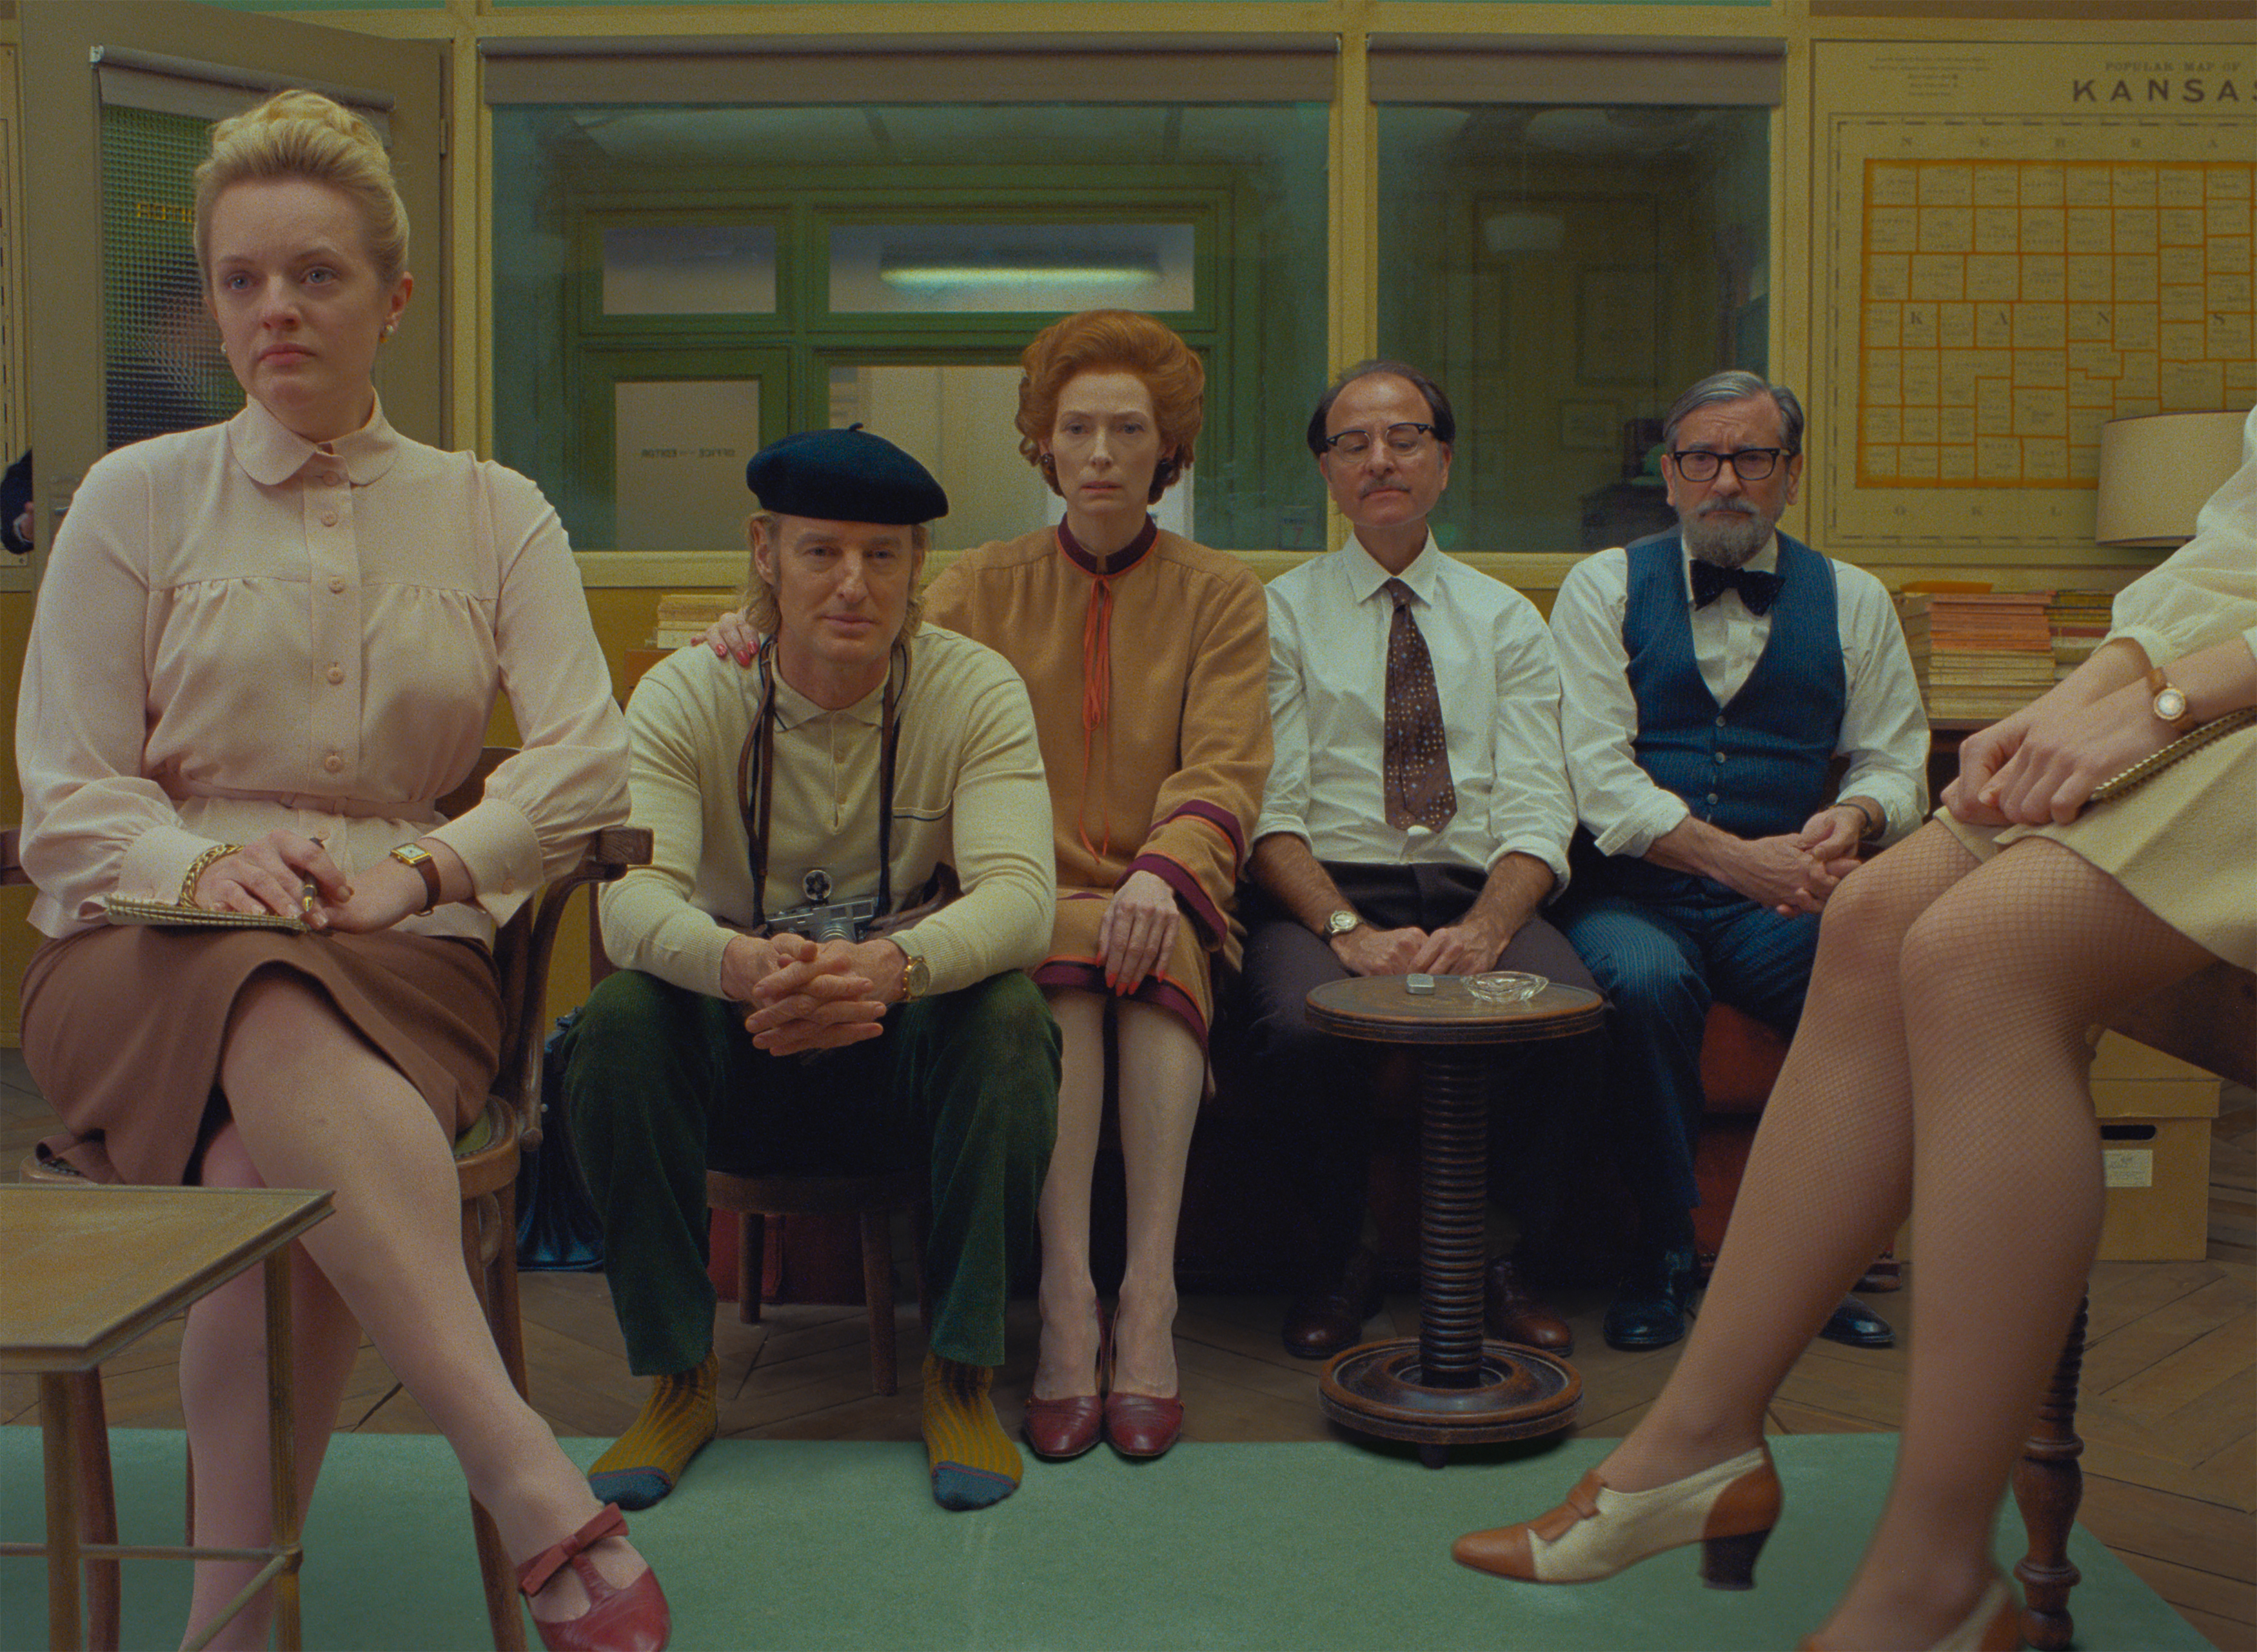 From The Grand Budapest Hotel to The Darjeeling Limited: five fashion  heroes from Wes Anderson films, The Grand Budapest Hotel